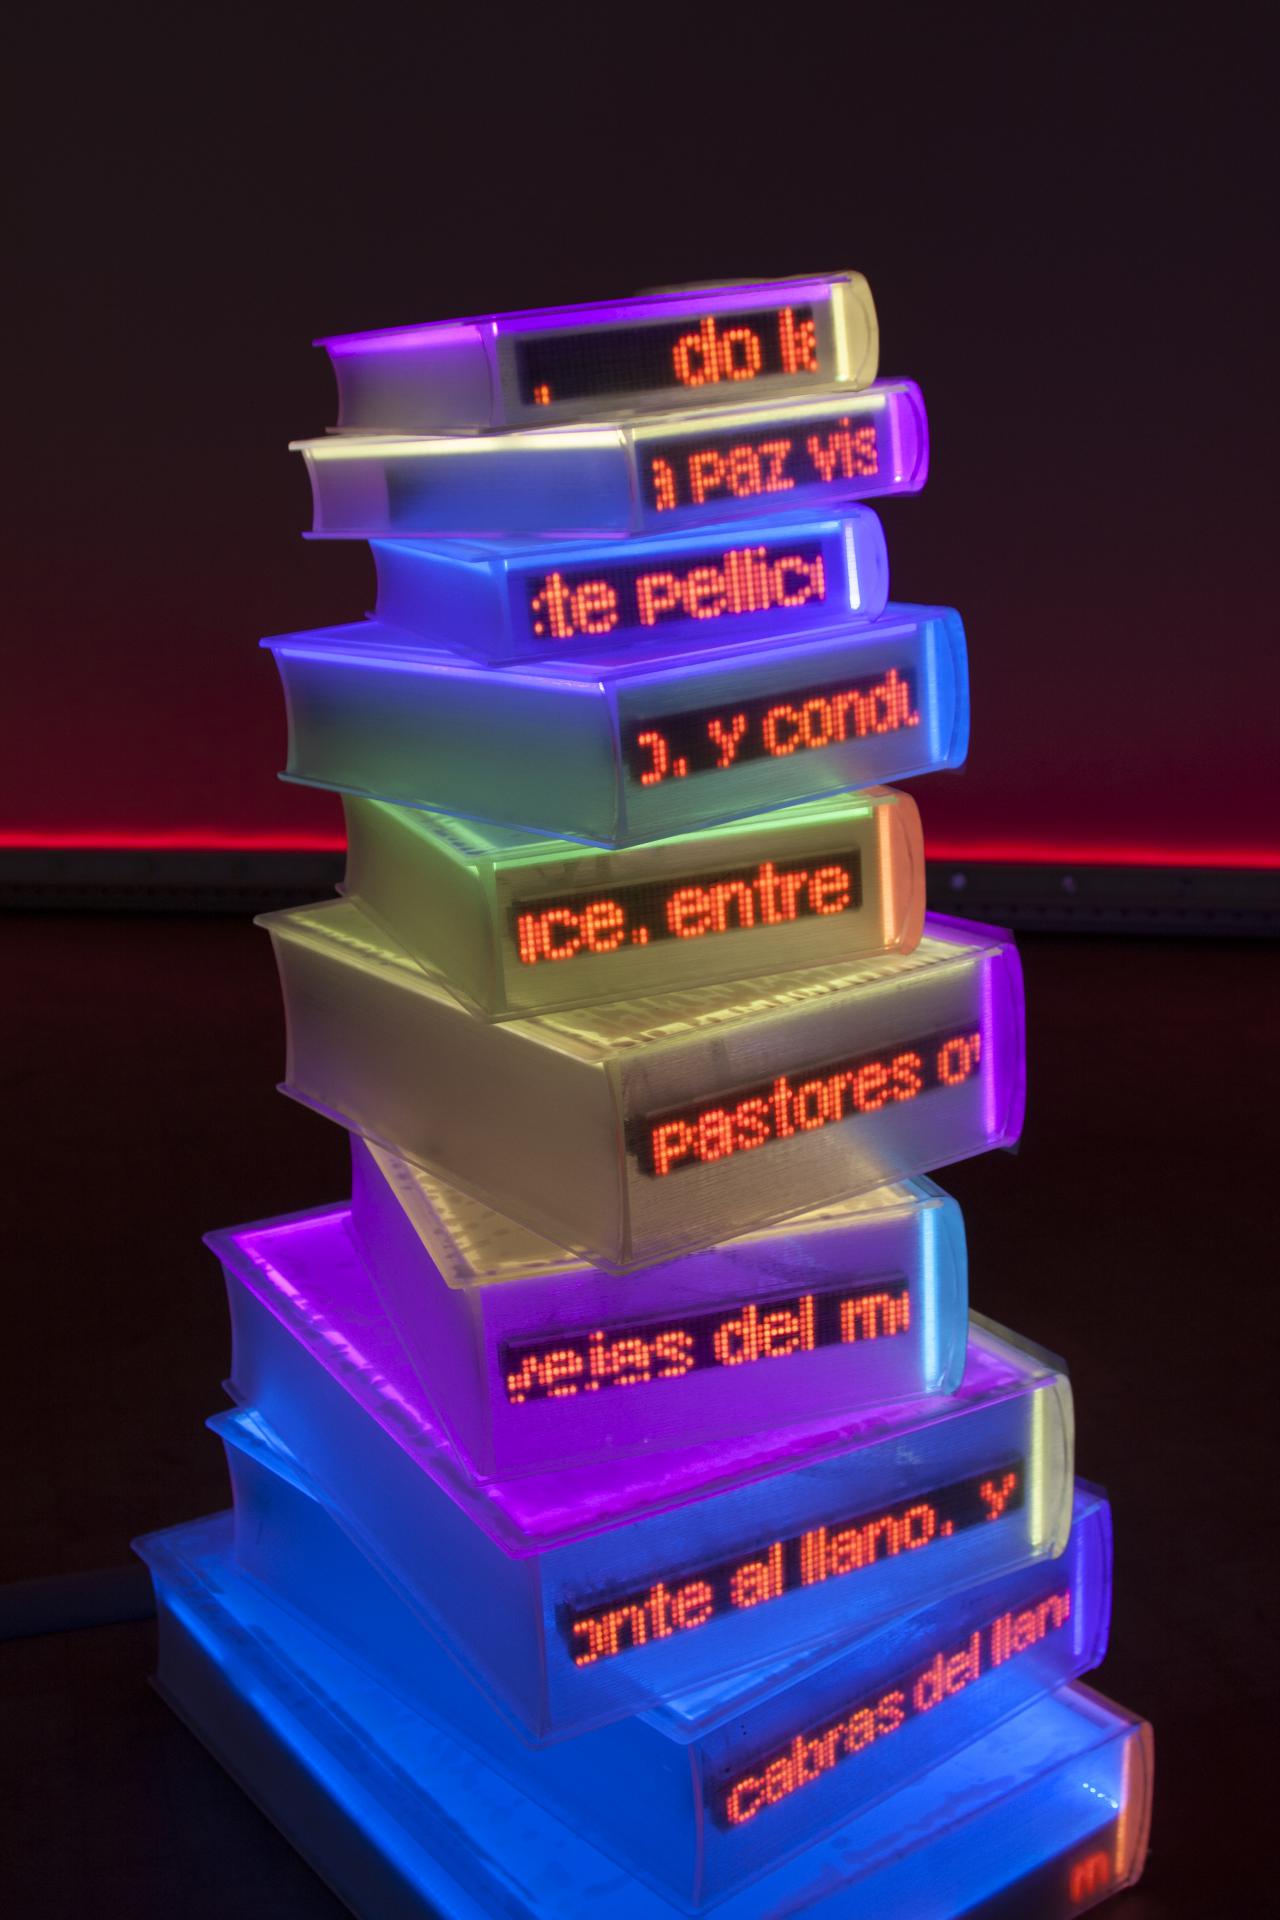 Colorfully illuminated books are stacked to form a sculpture.